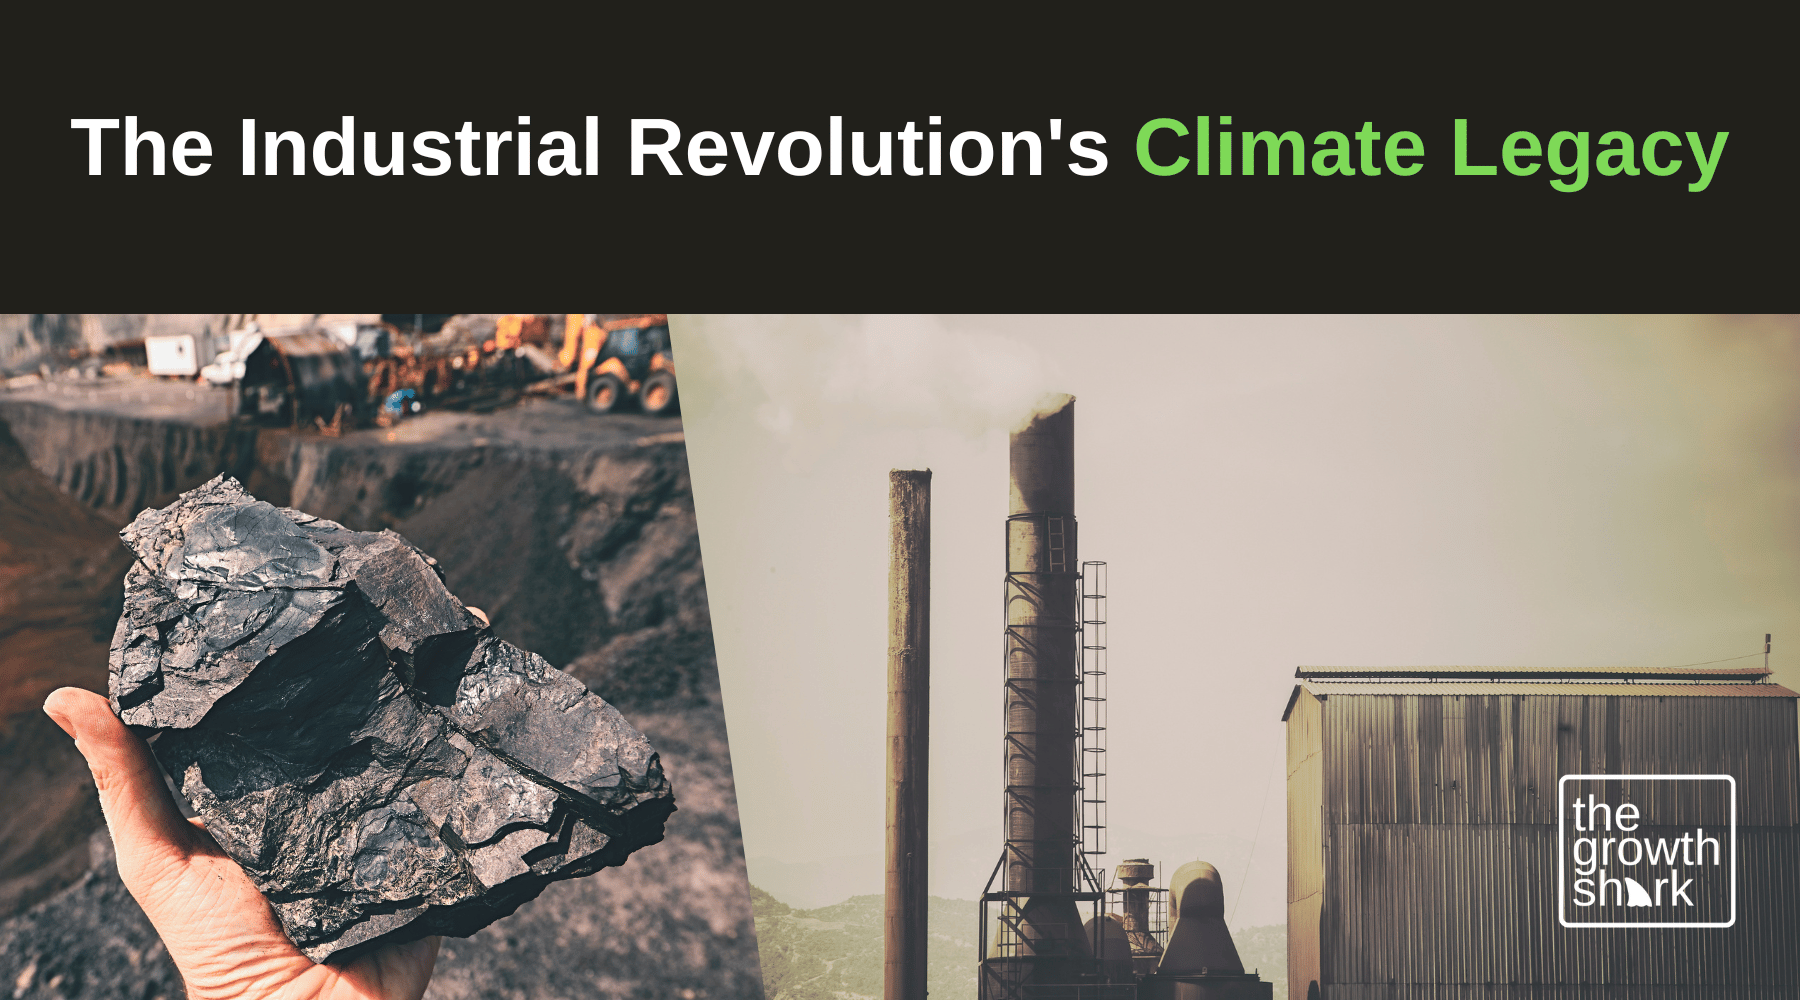 The Industrial Revolution's Climate Change Effects